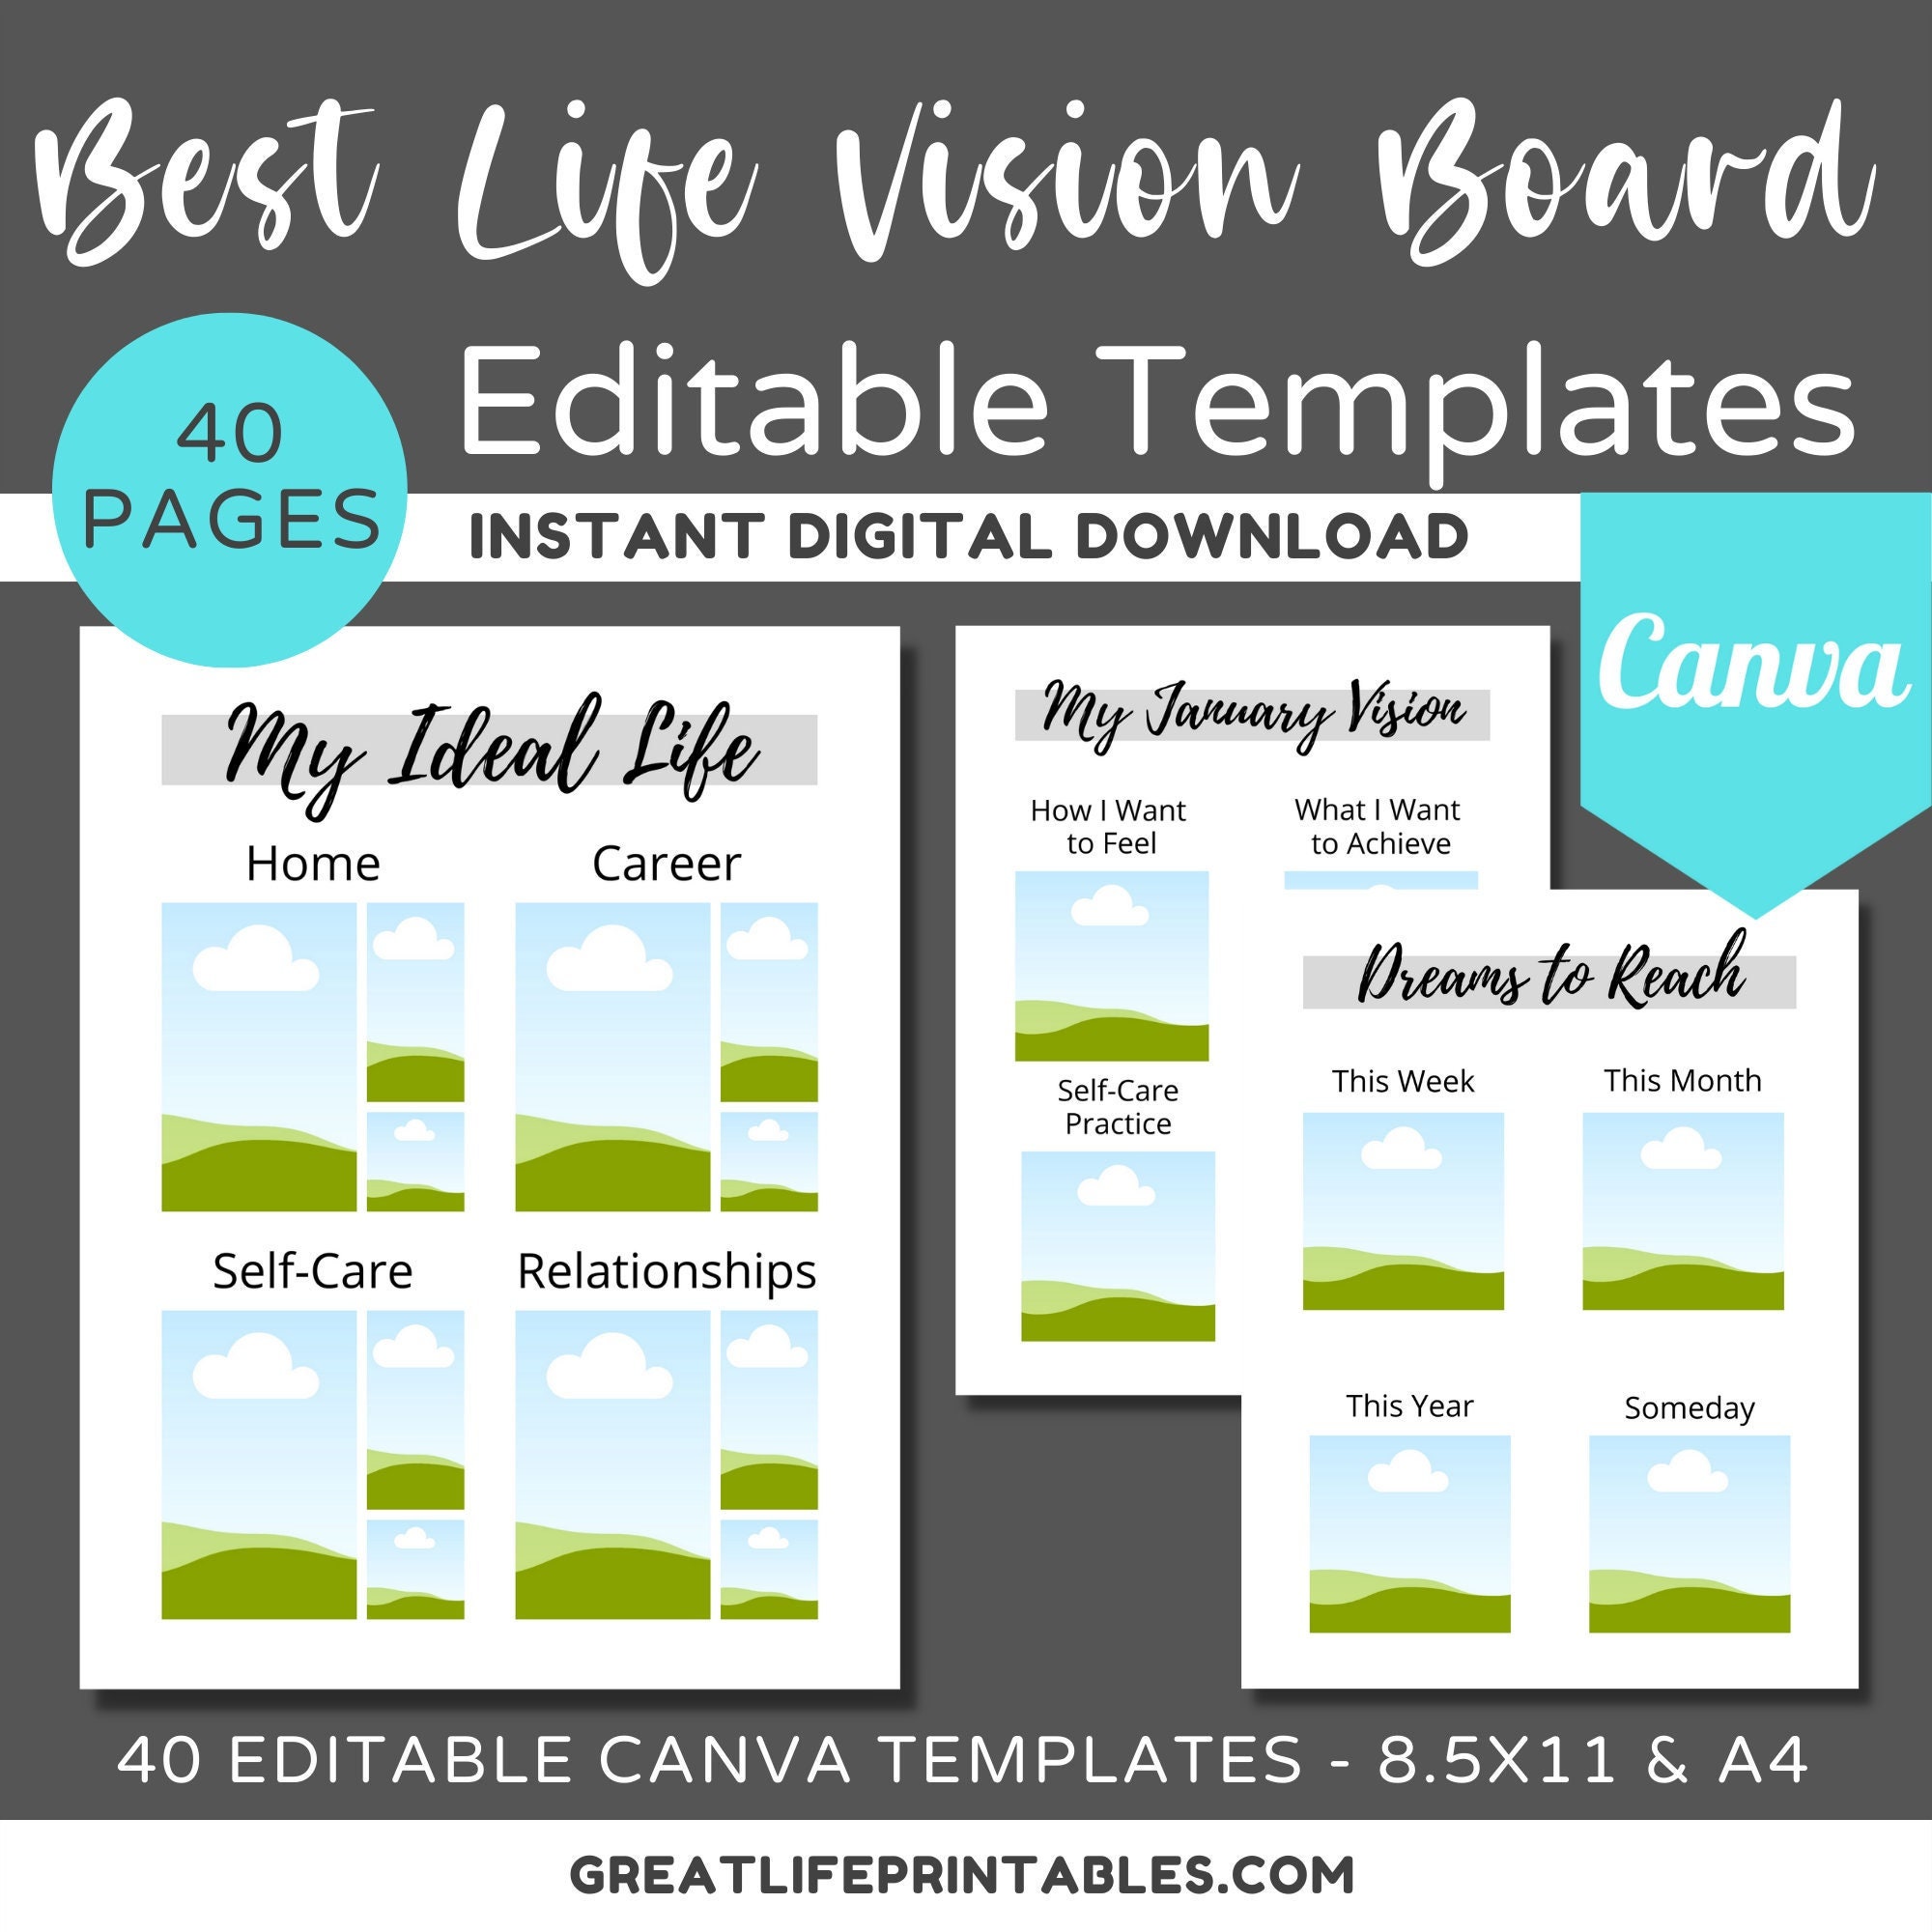 My New Life Vision Board Clip Art Book For Women: Images, Affirmations &  Quotes For Your Vision Board With Prompts & Tips By A Master Trainer Of The